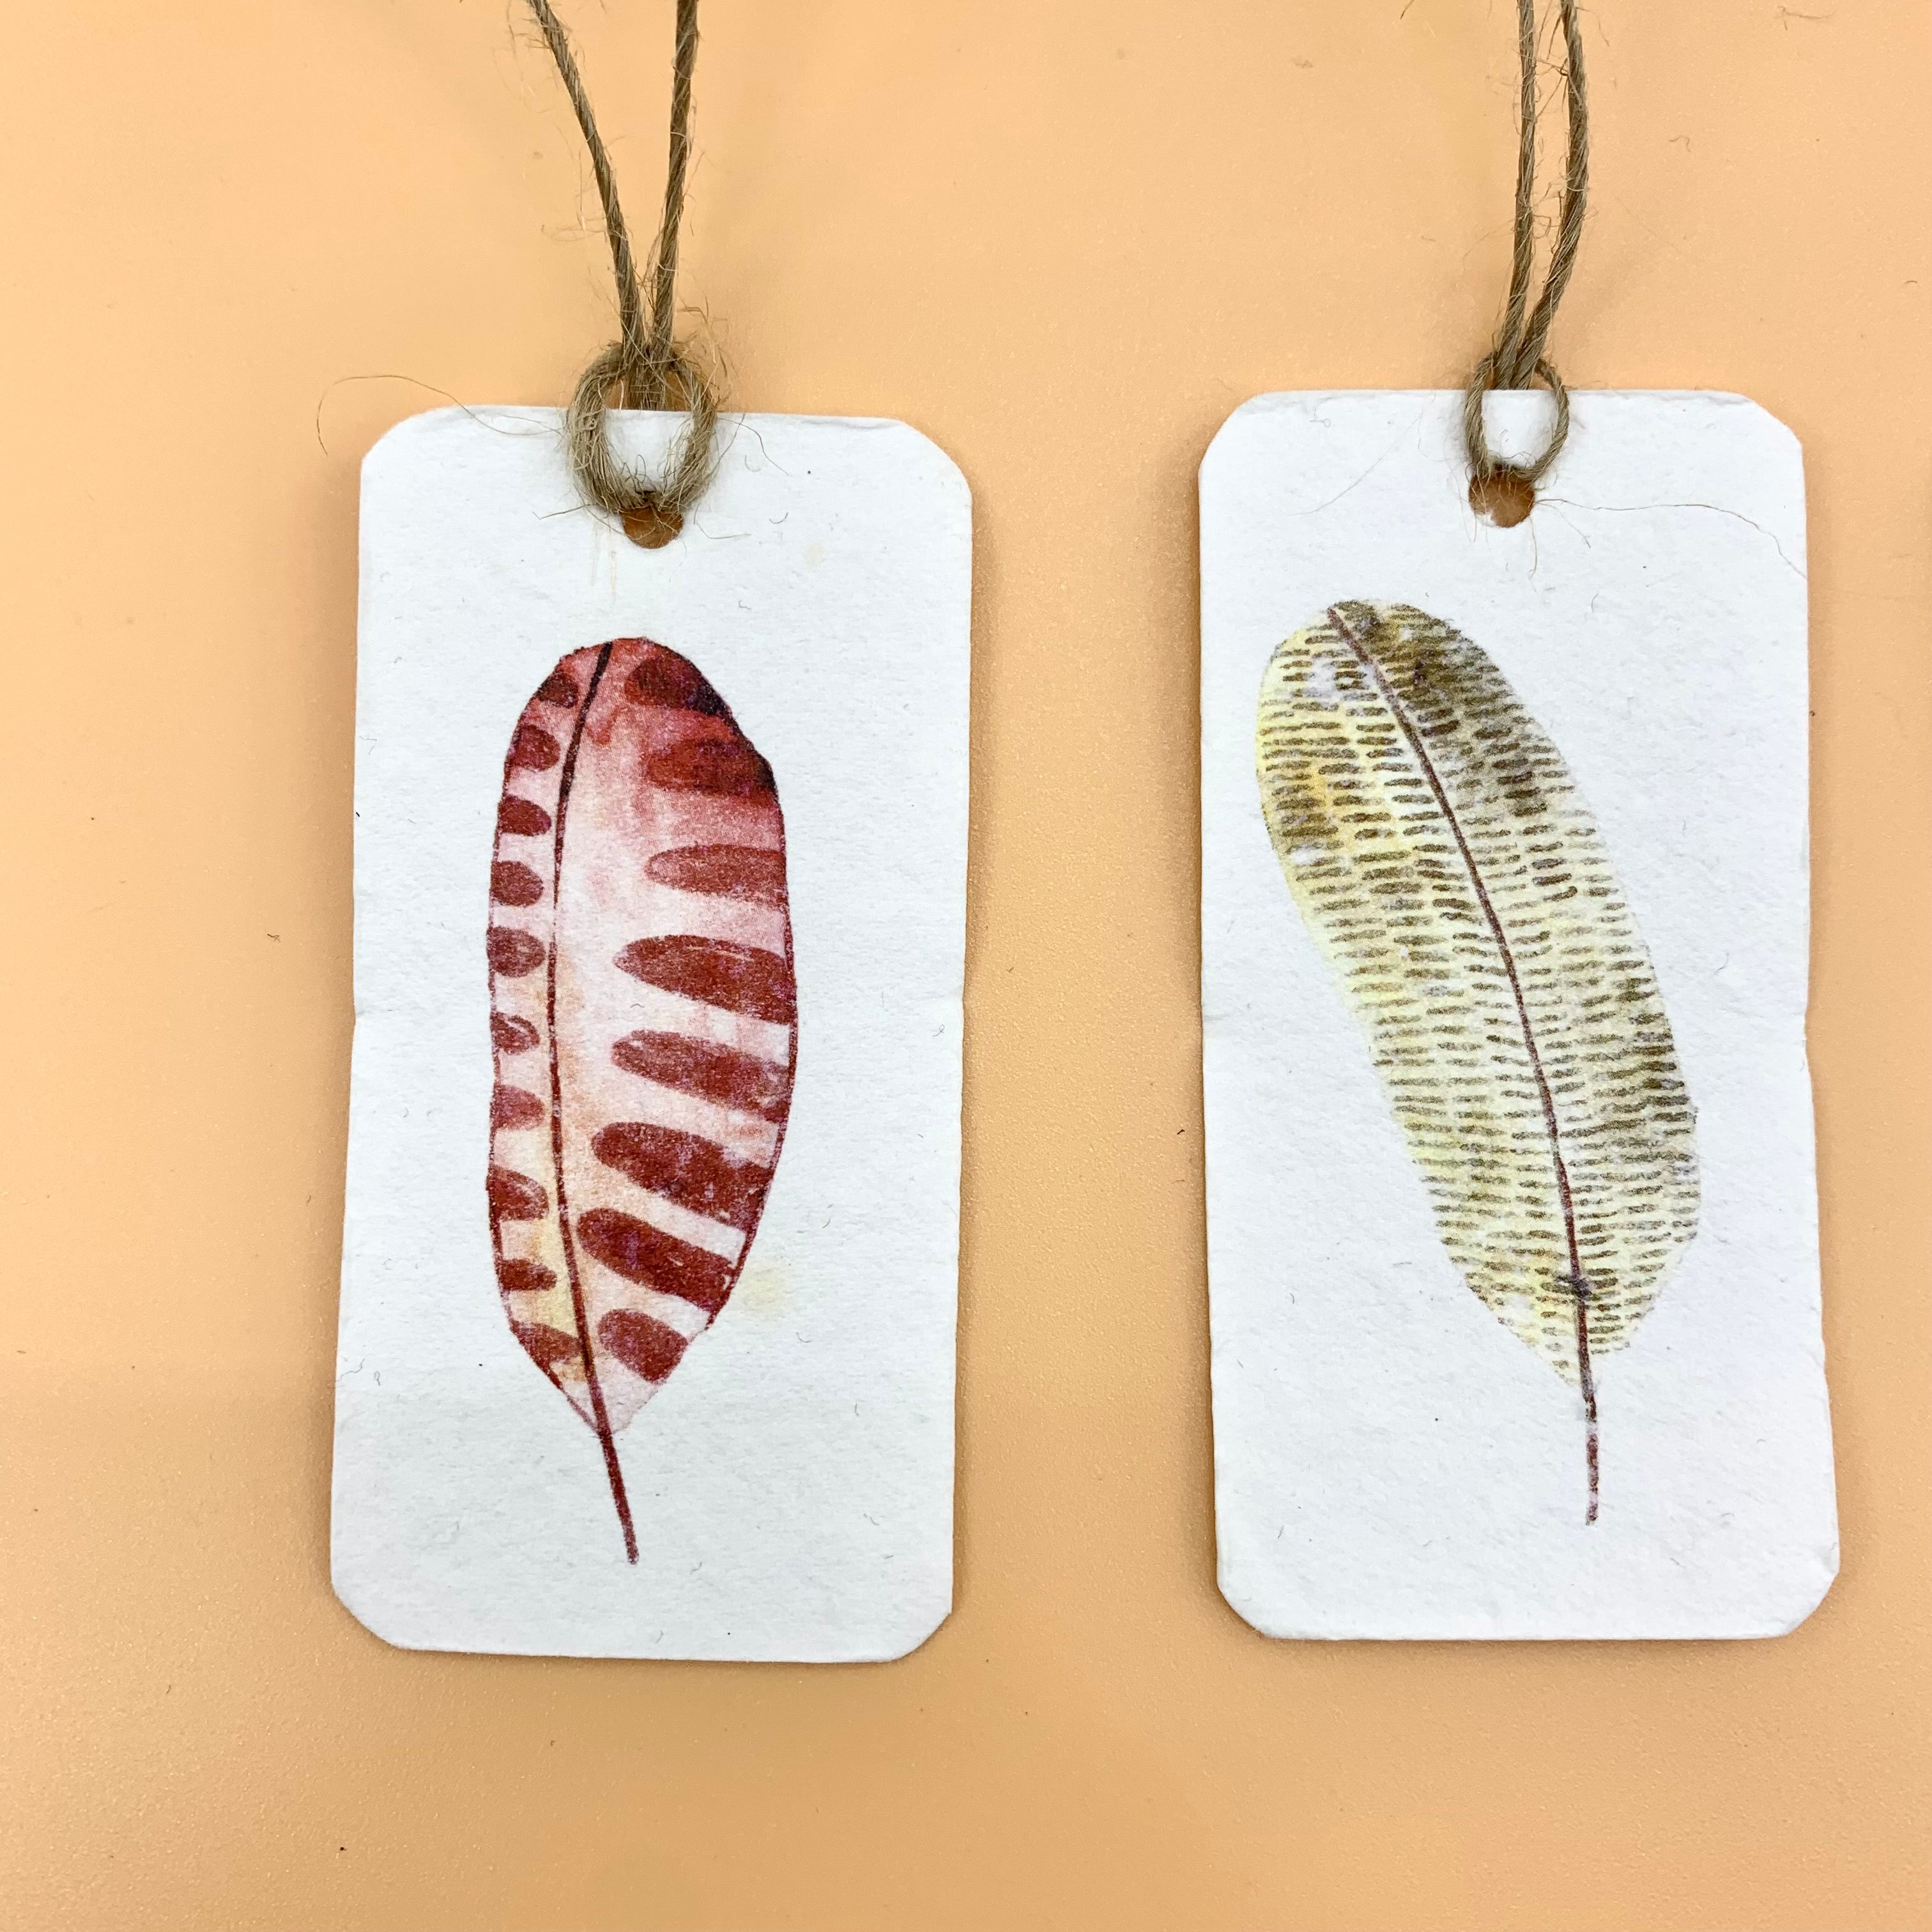 Seed paper plantable gift tags from our "i-grow" collection : Feathers | Set of 6